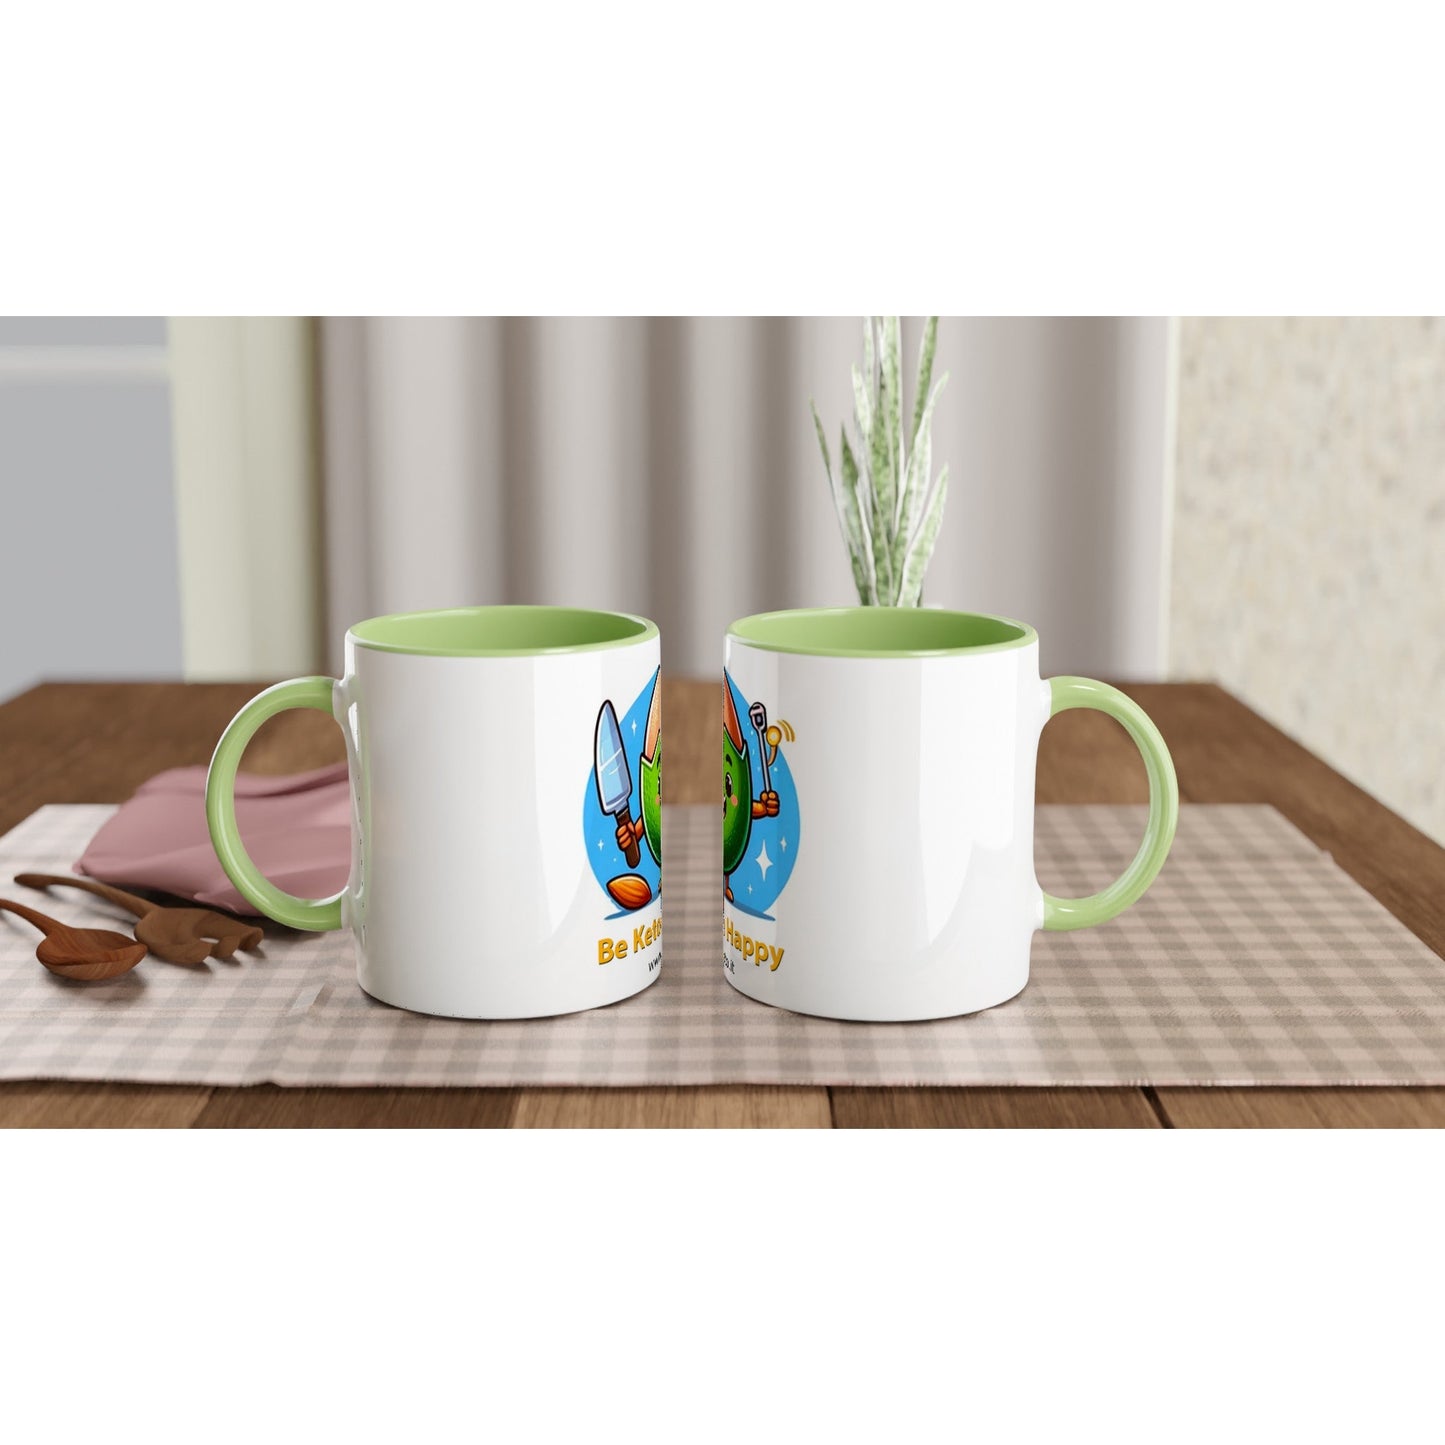 350ml "Be Keto Be Happy" Mug with Colored Interior - Start the Day with Style and Health-10